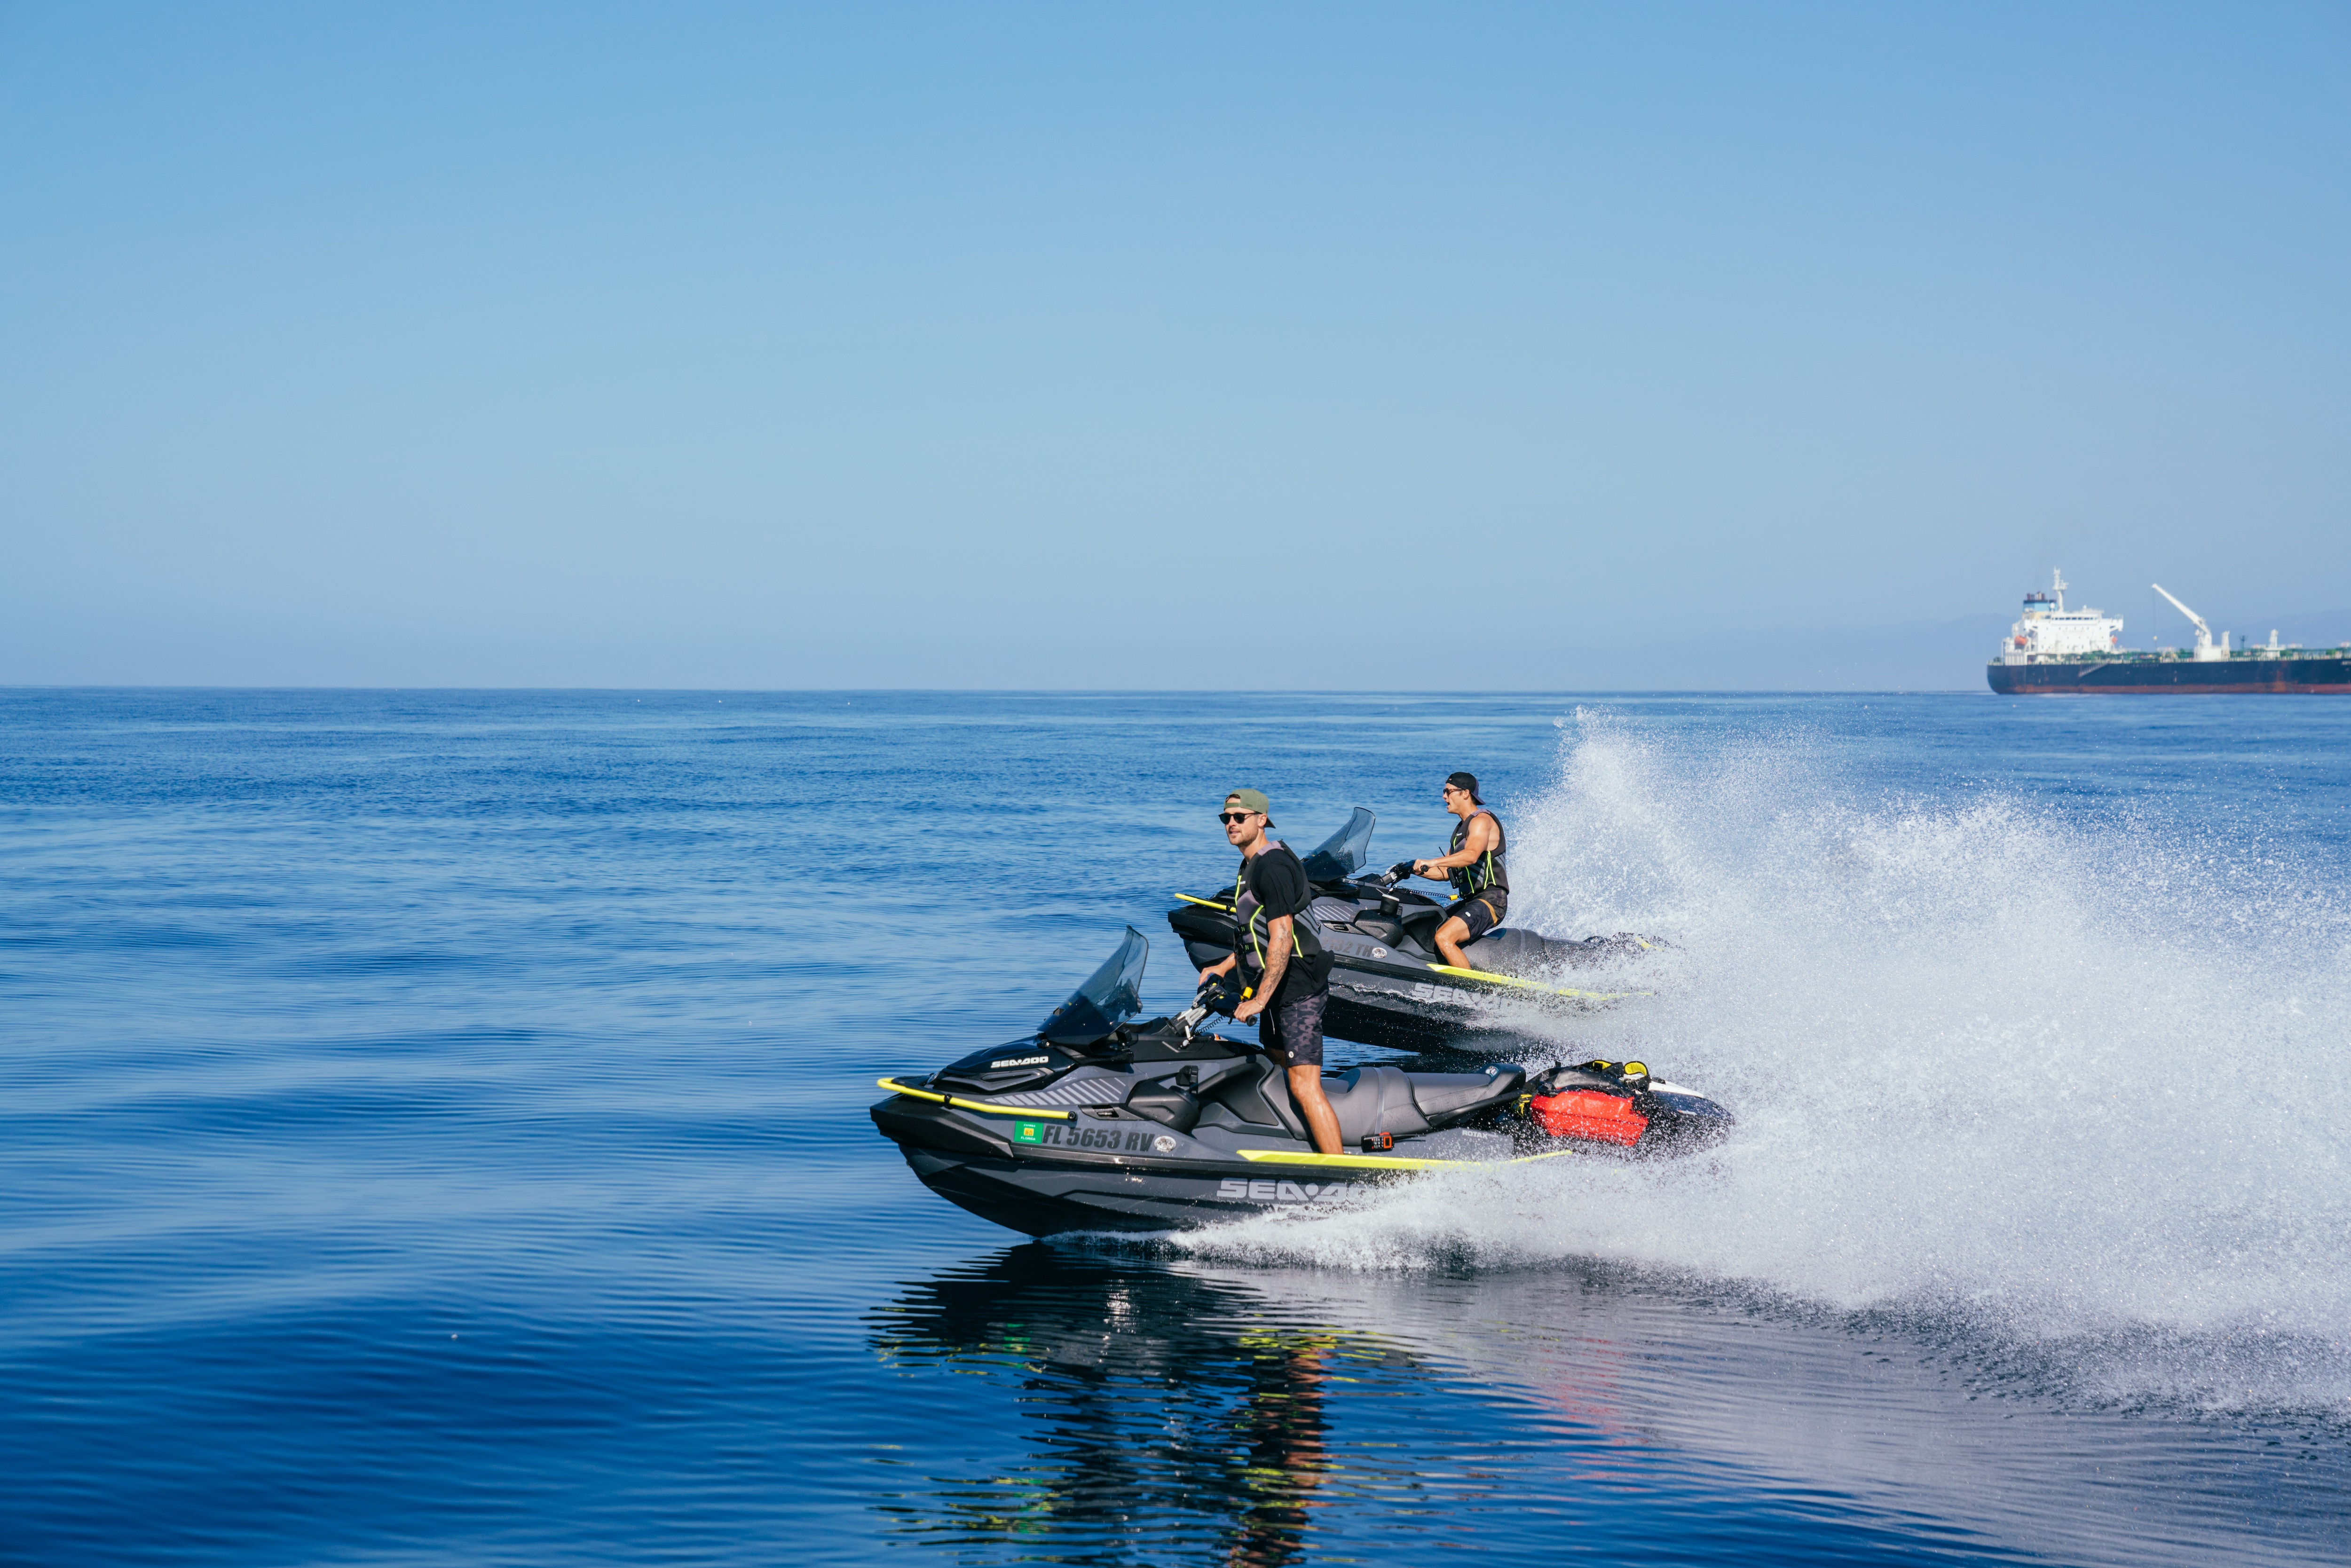 Dylan Efron and his friend on their Sea-Doo Explorer Pro 170